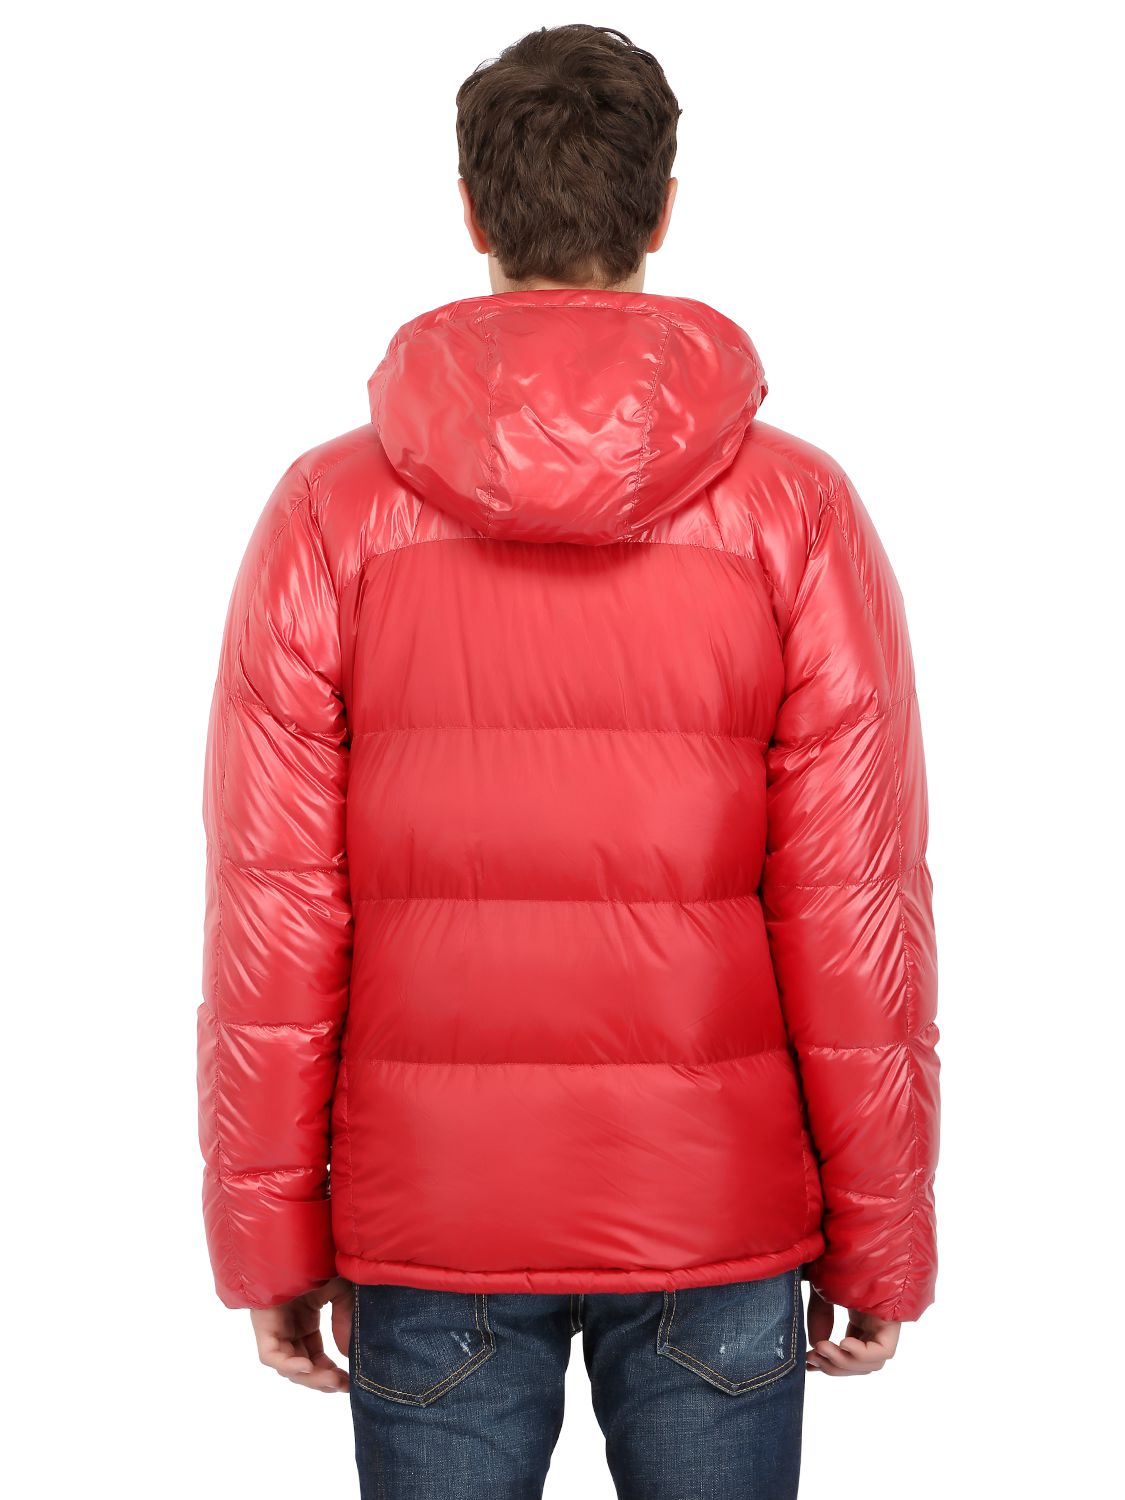 Patagonia Fitz Roy Down Jacket in Red for Men - Lyst